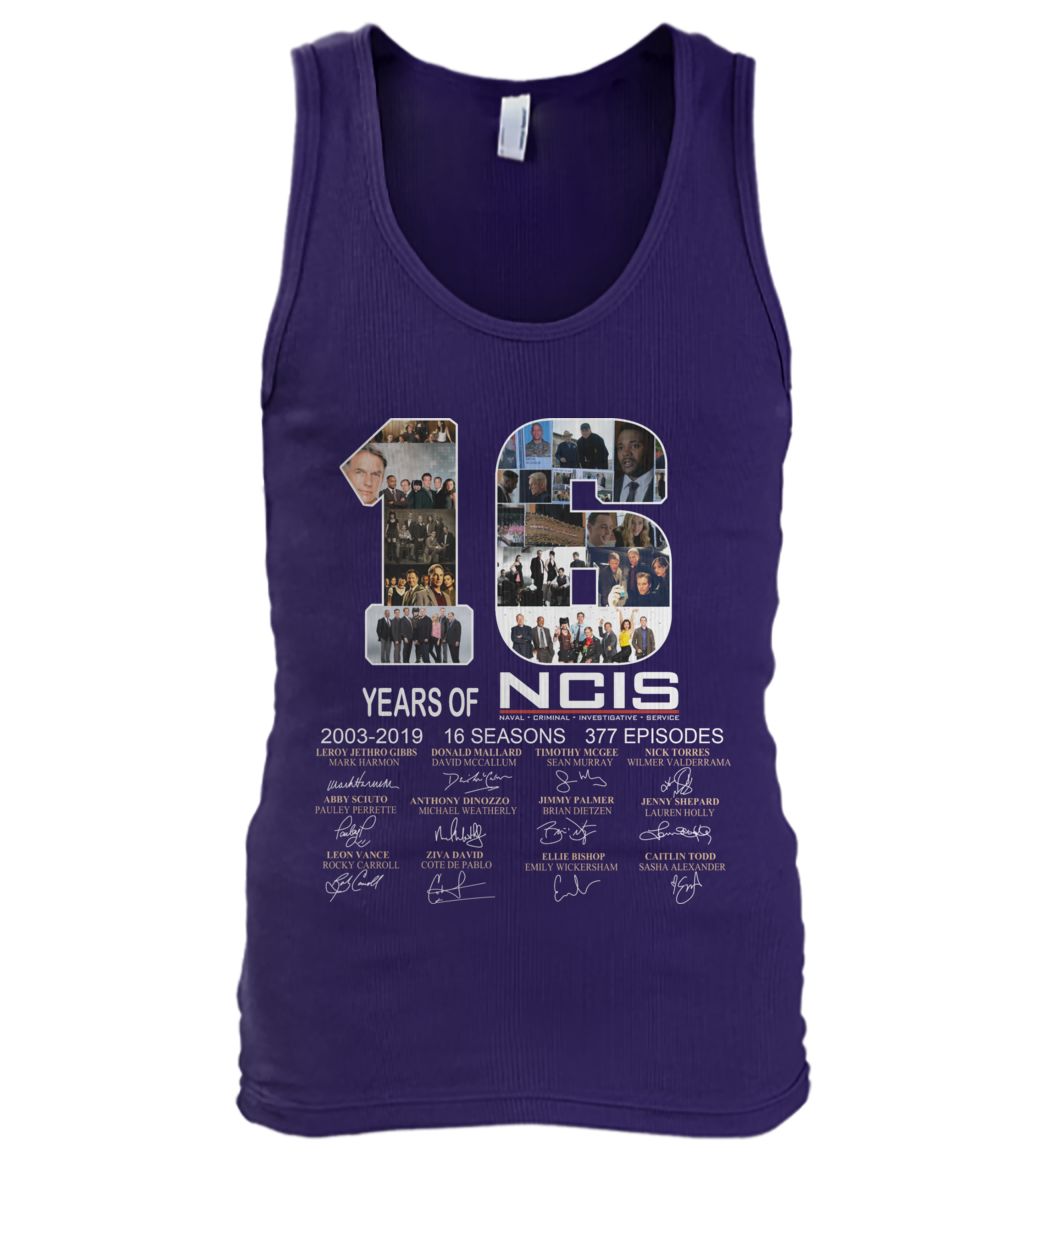 16 years of ncis 2003-2019 16 seasons 377 episodes signatures men's tank top